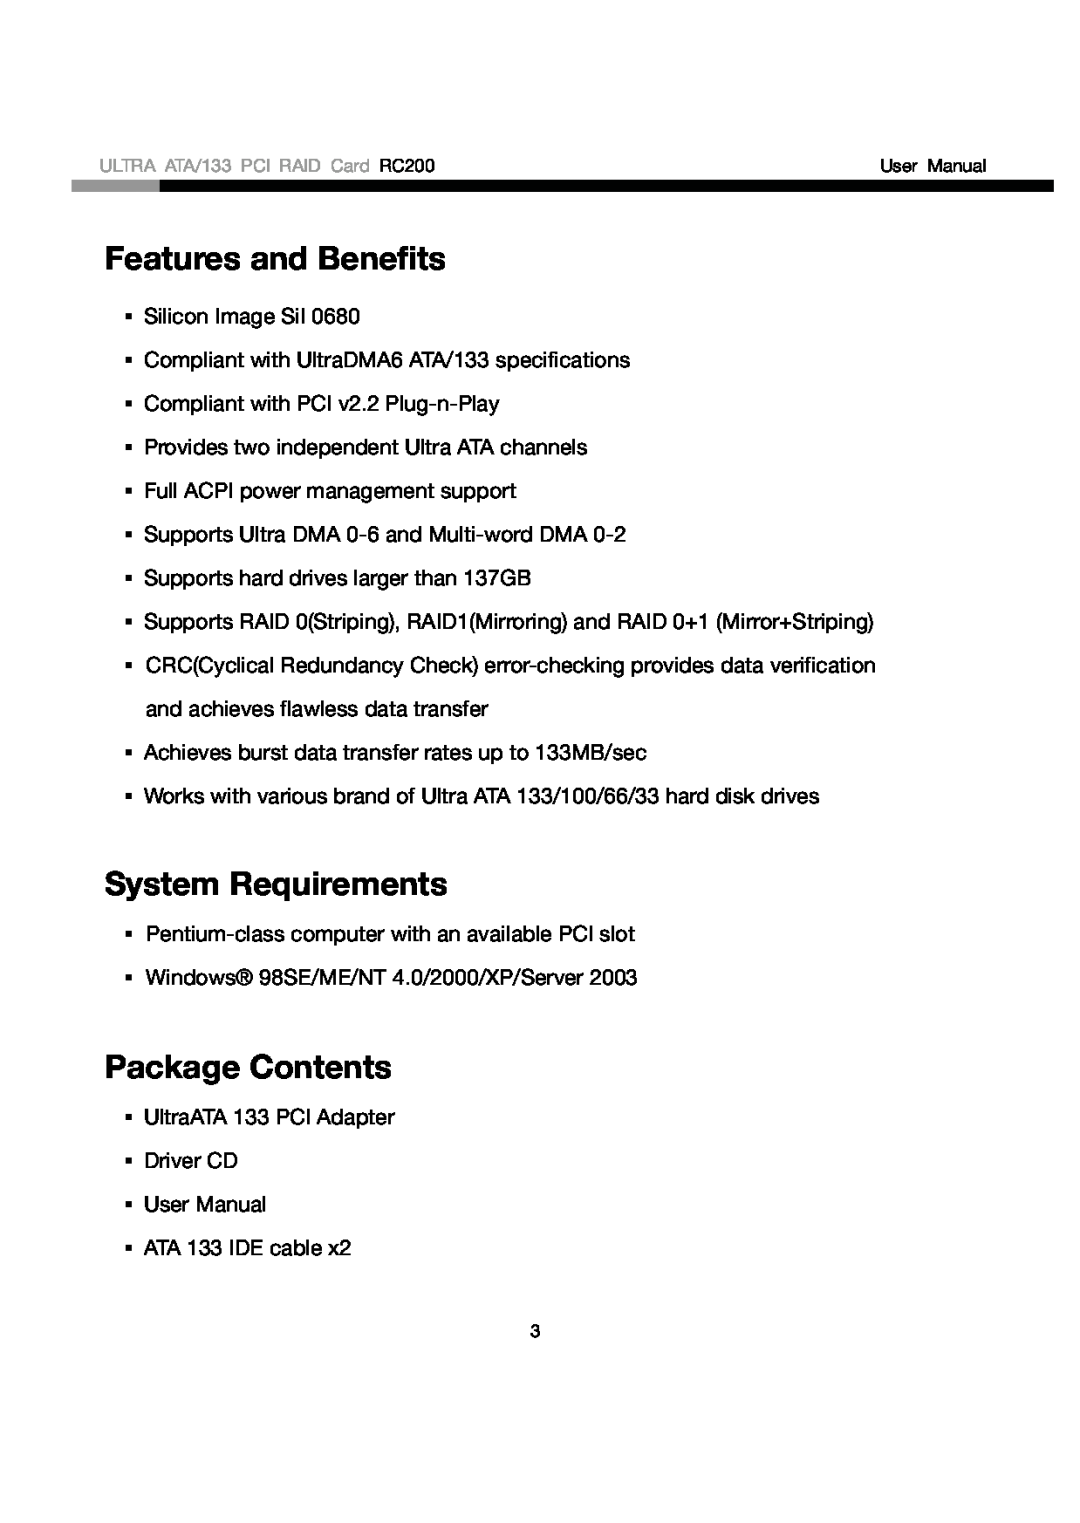 Rosewill RC200 user manual Features and Benefits, System Requirements, Package Contents 